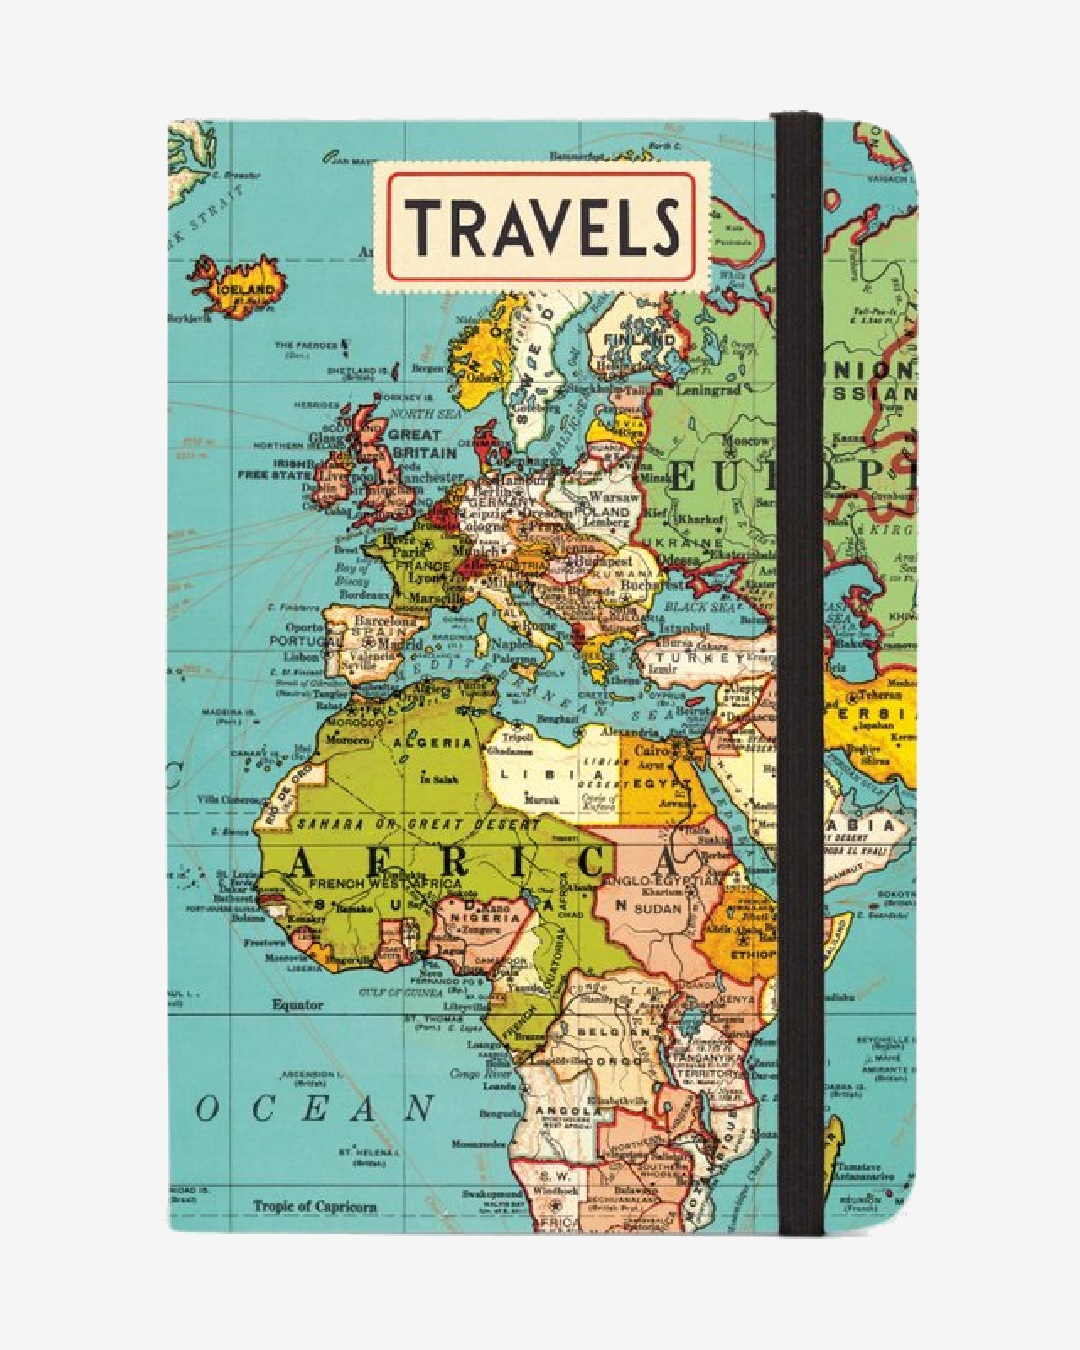 Travel notebook with world map